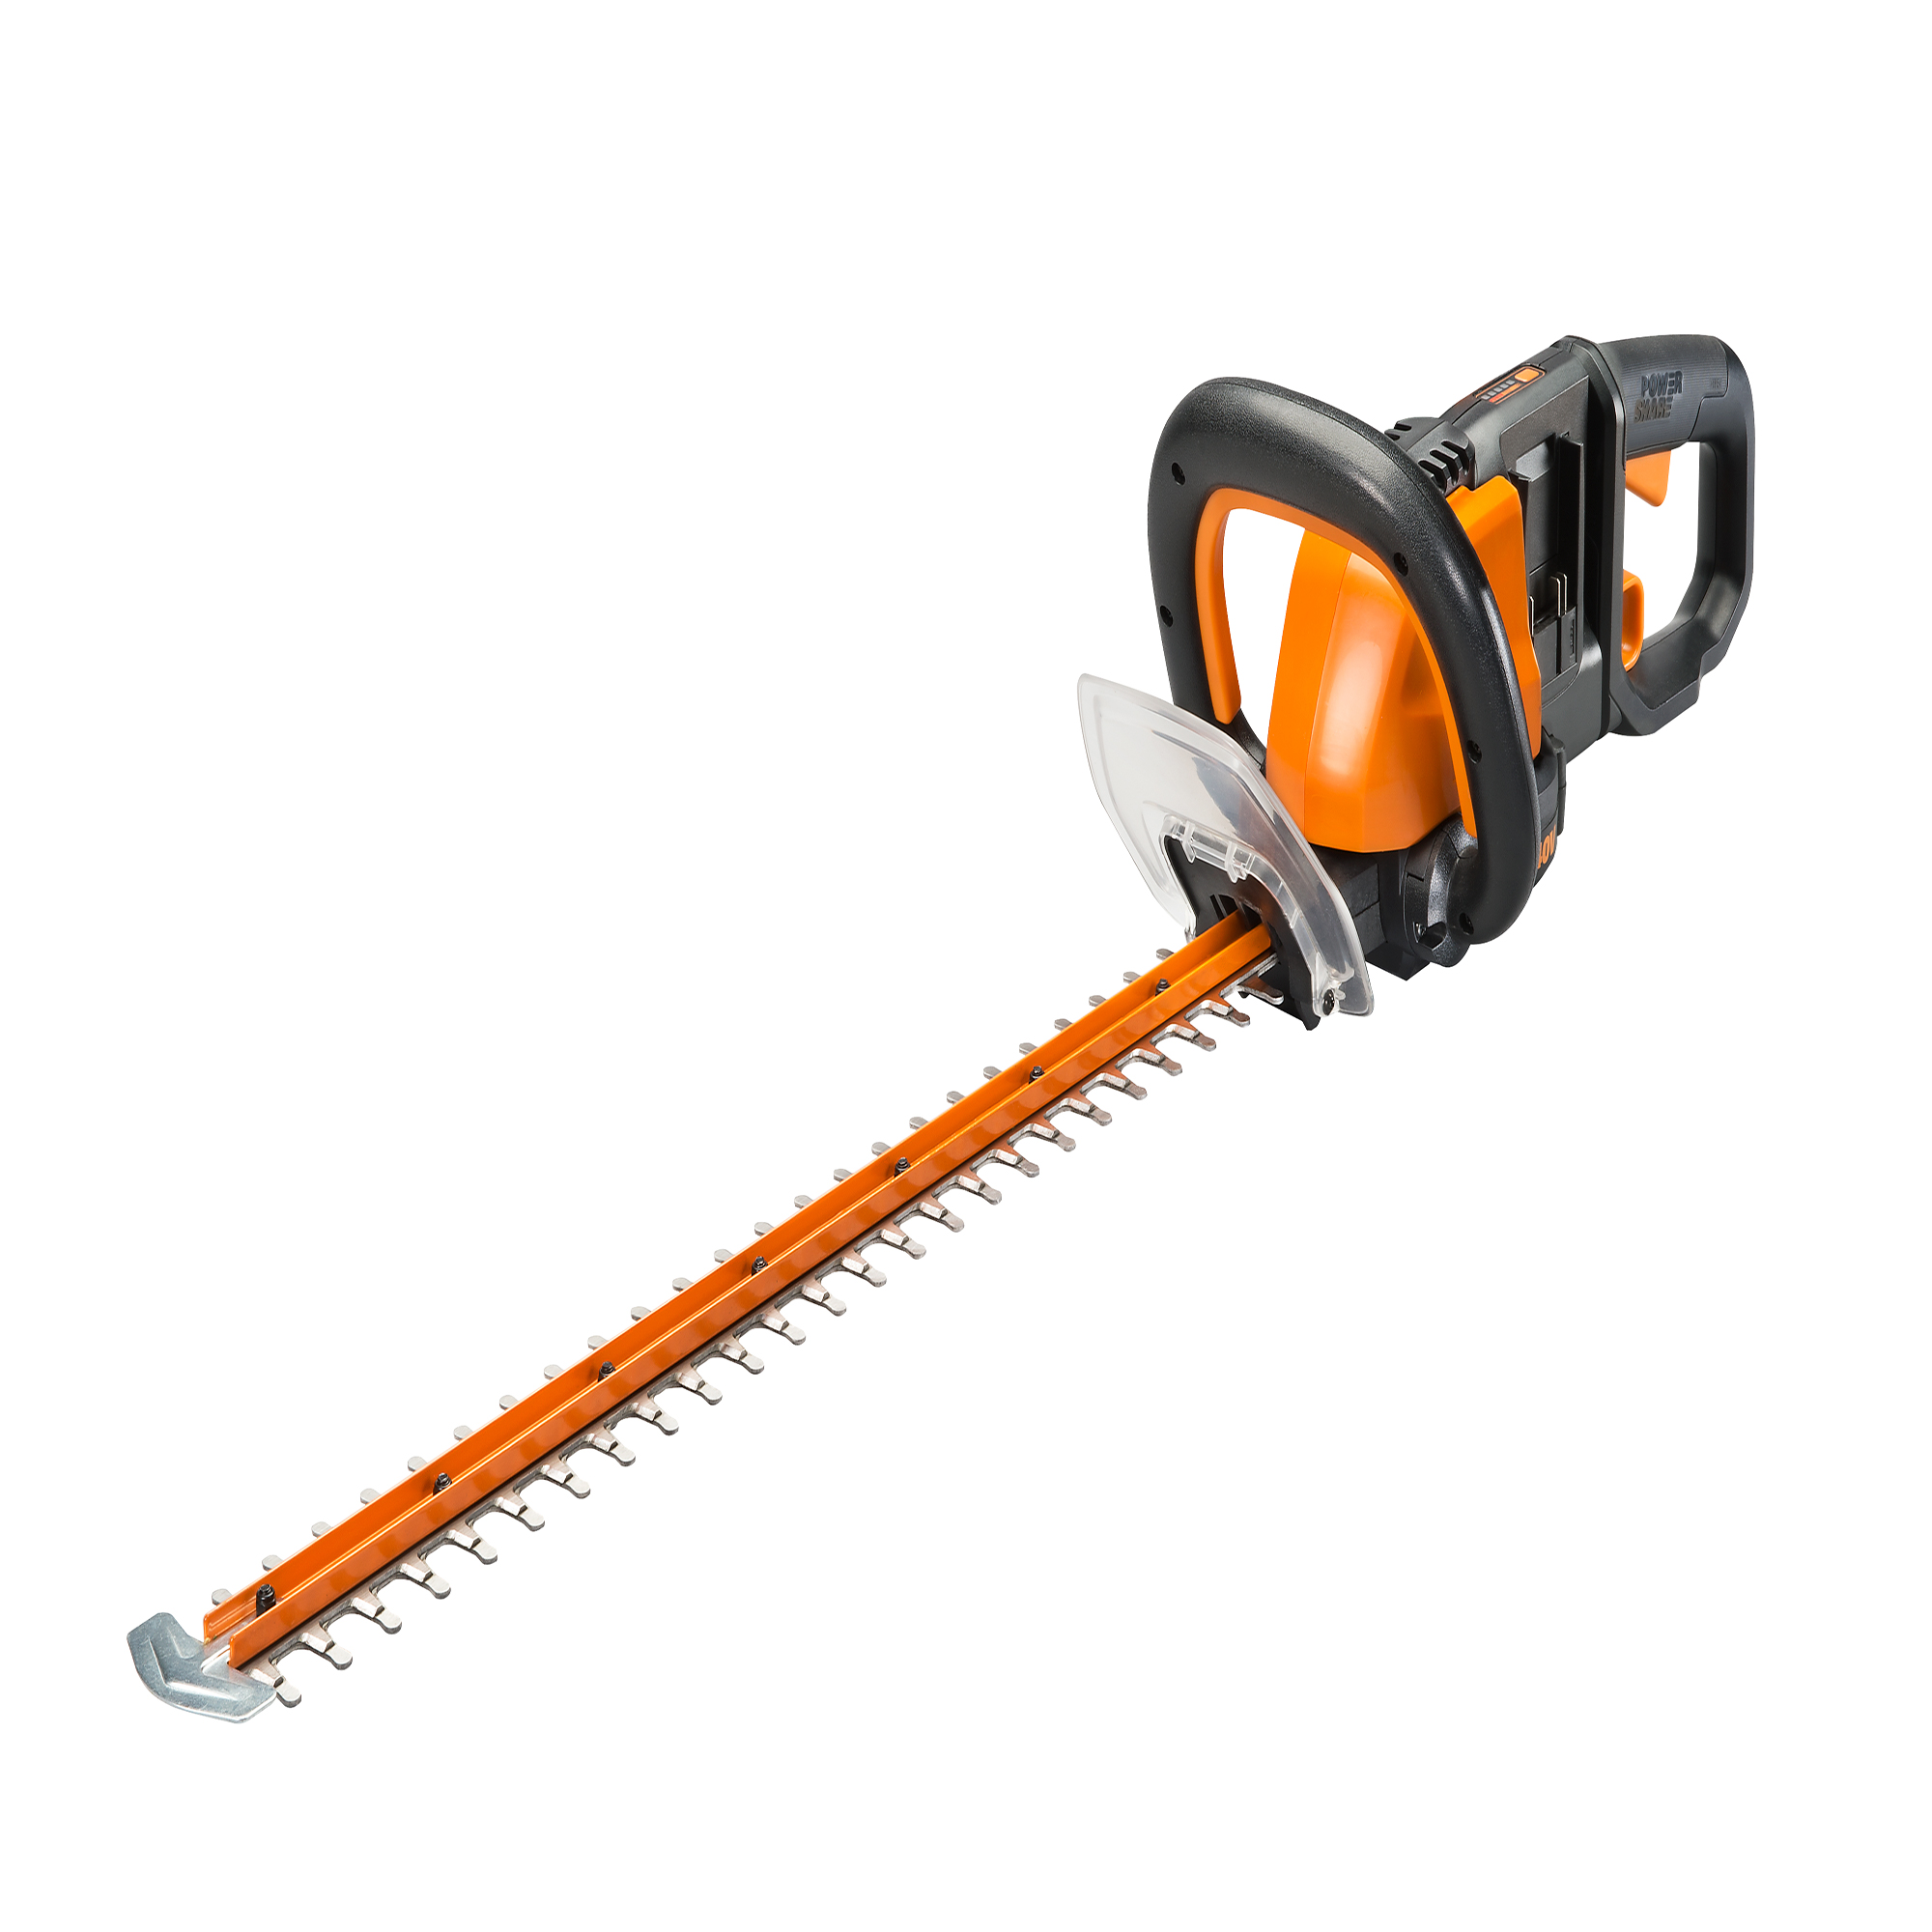 Worx WG284.9 40V Power Share 24" Cordless Hedge Trimmer (Tool Only) - image 1 of 10